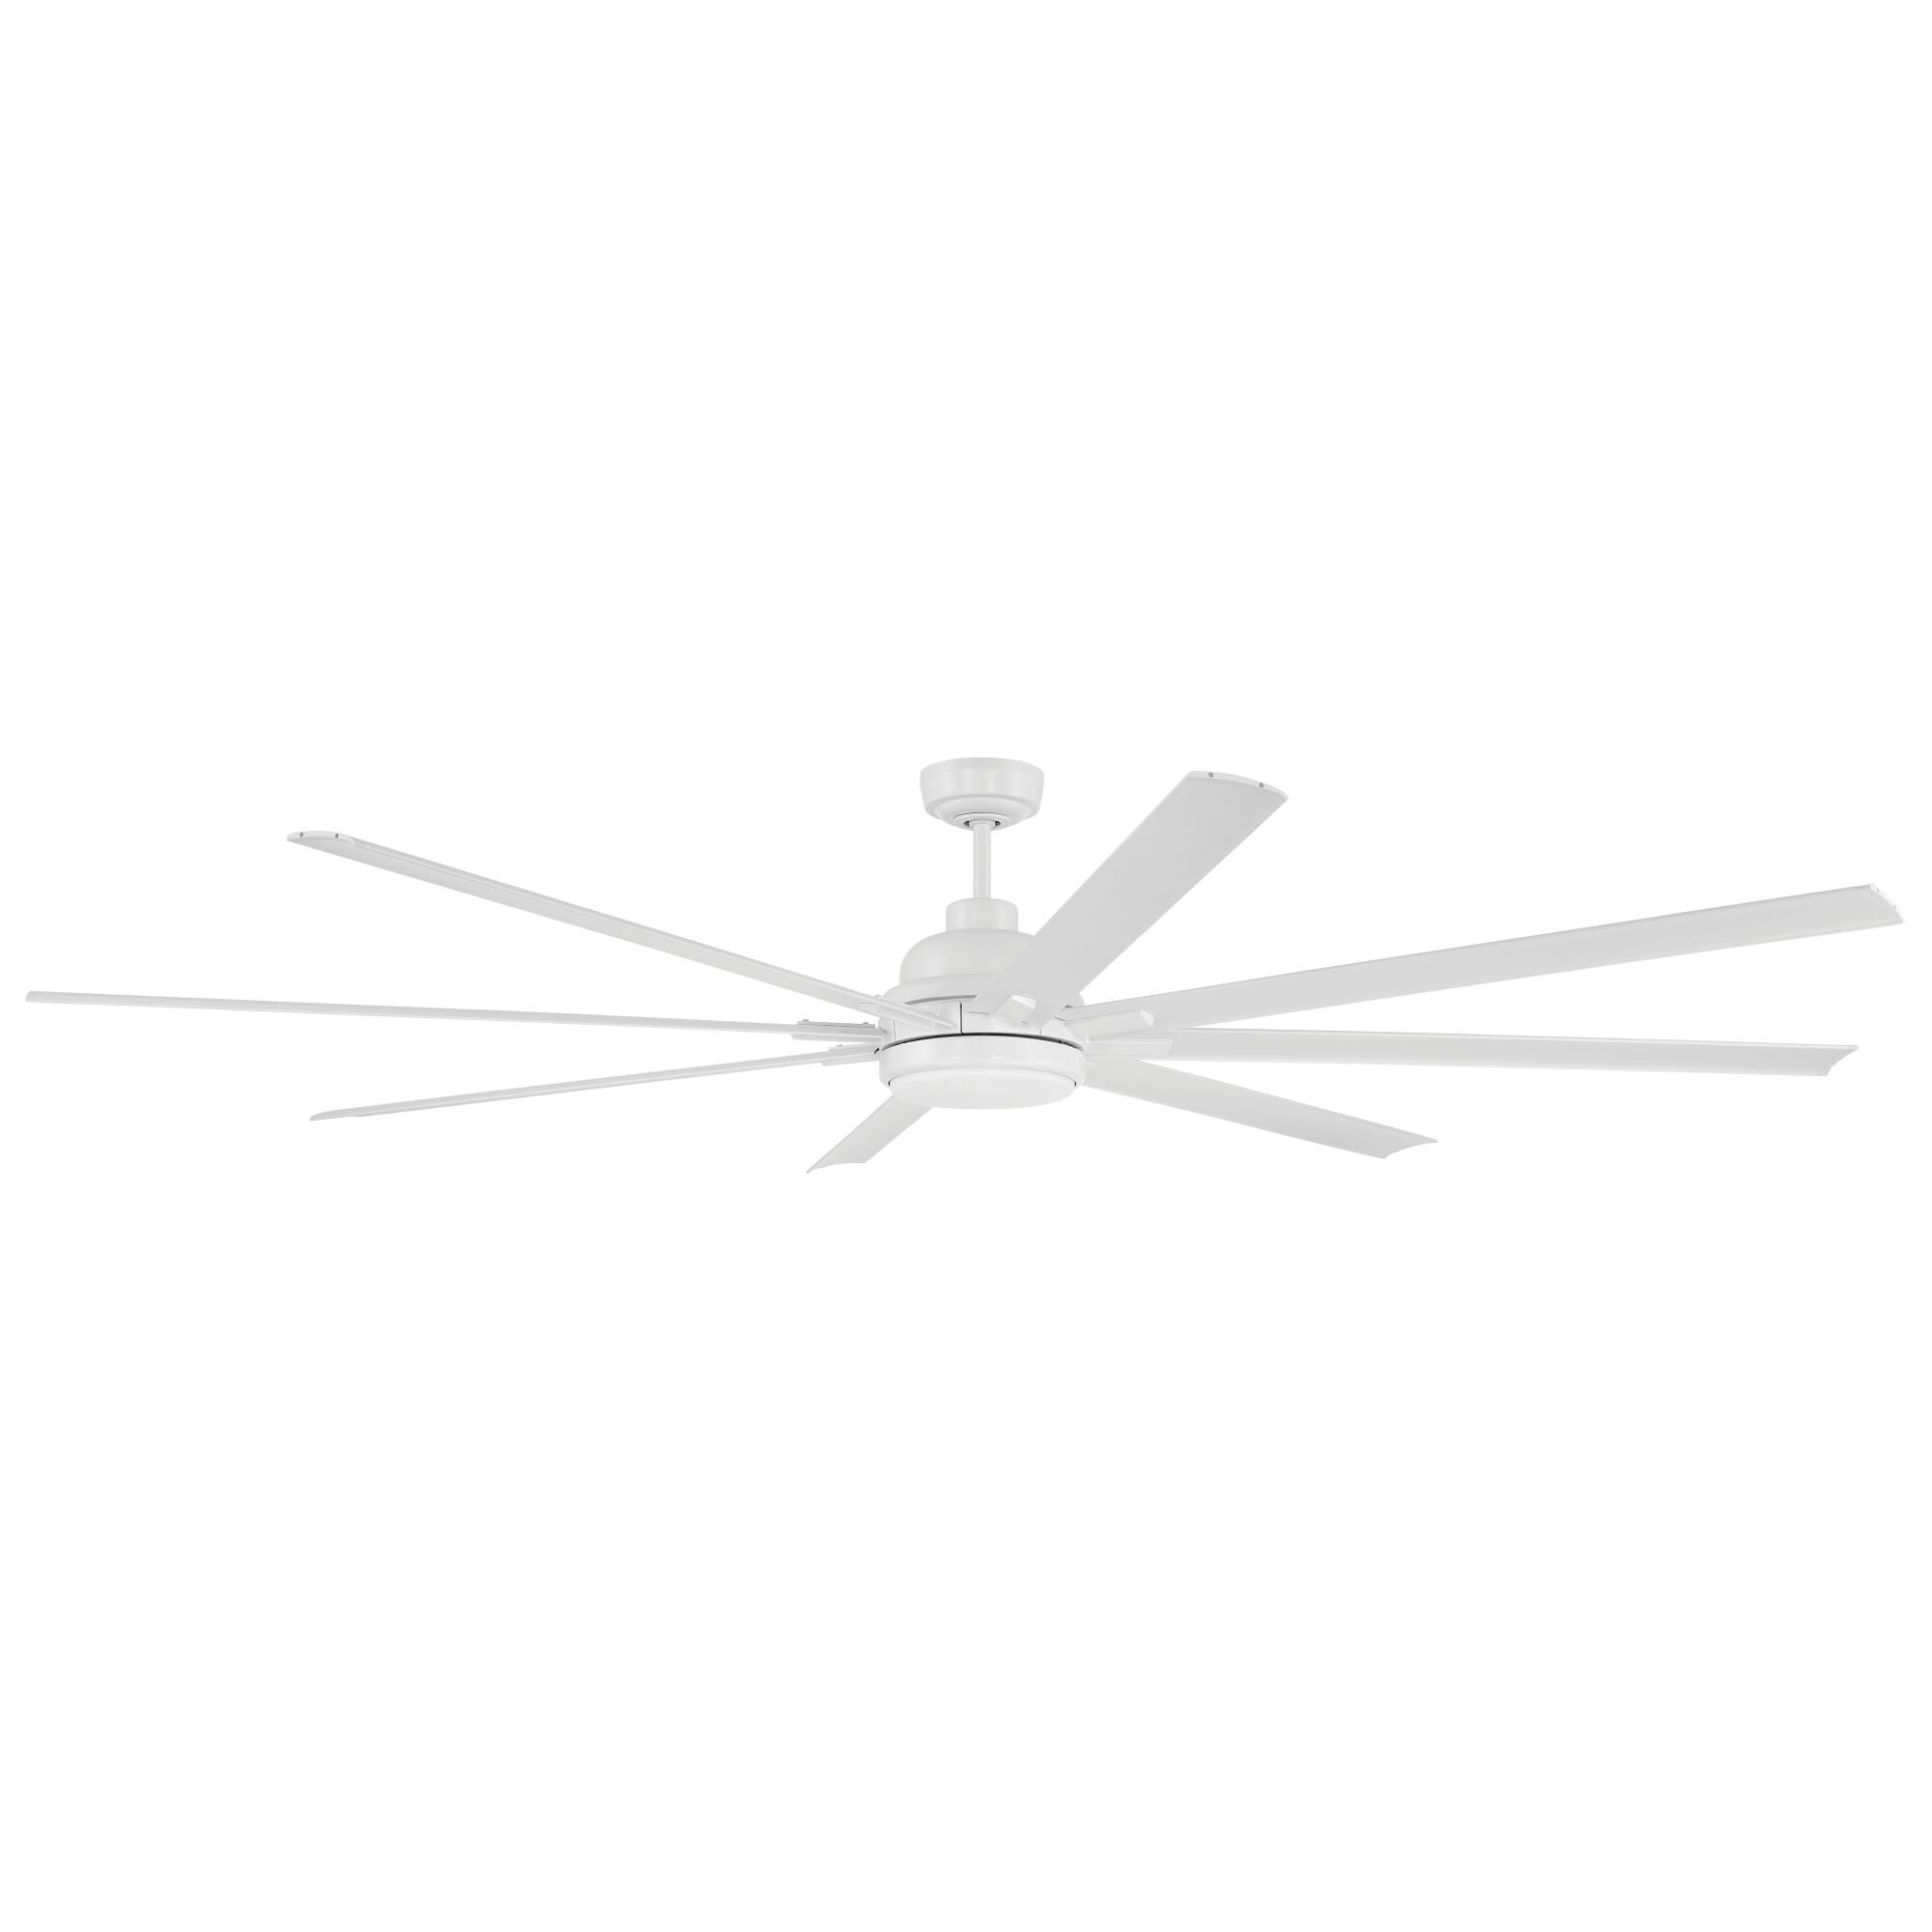 Photos - Fan Craftmade Rush Outdoor Rated 84 Inch Ceiling  Rush - RSH84W8 - Modern C